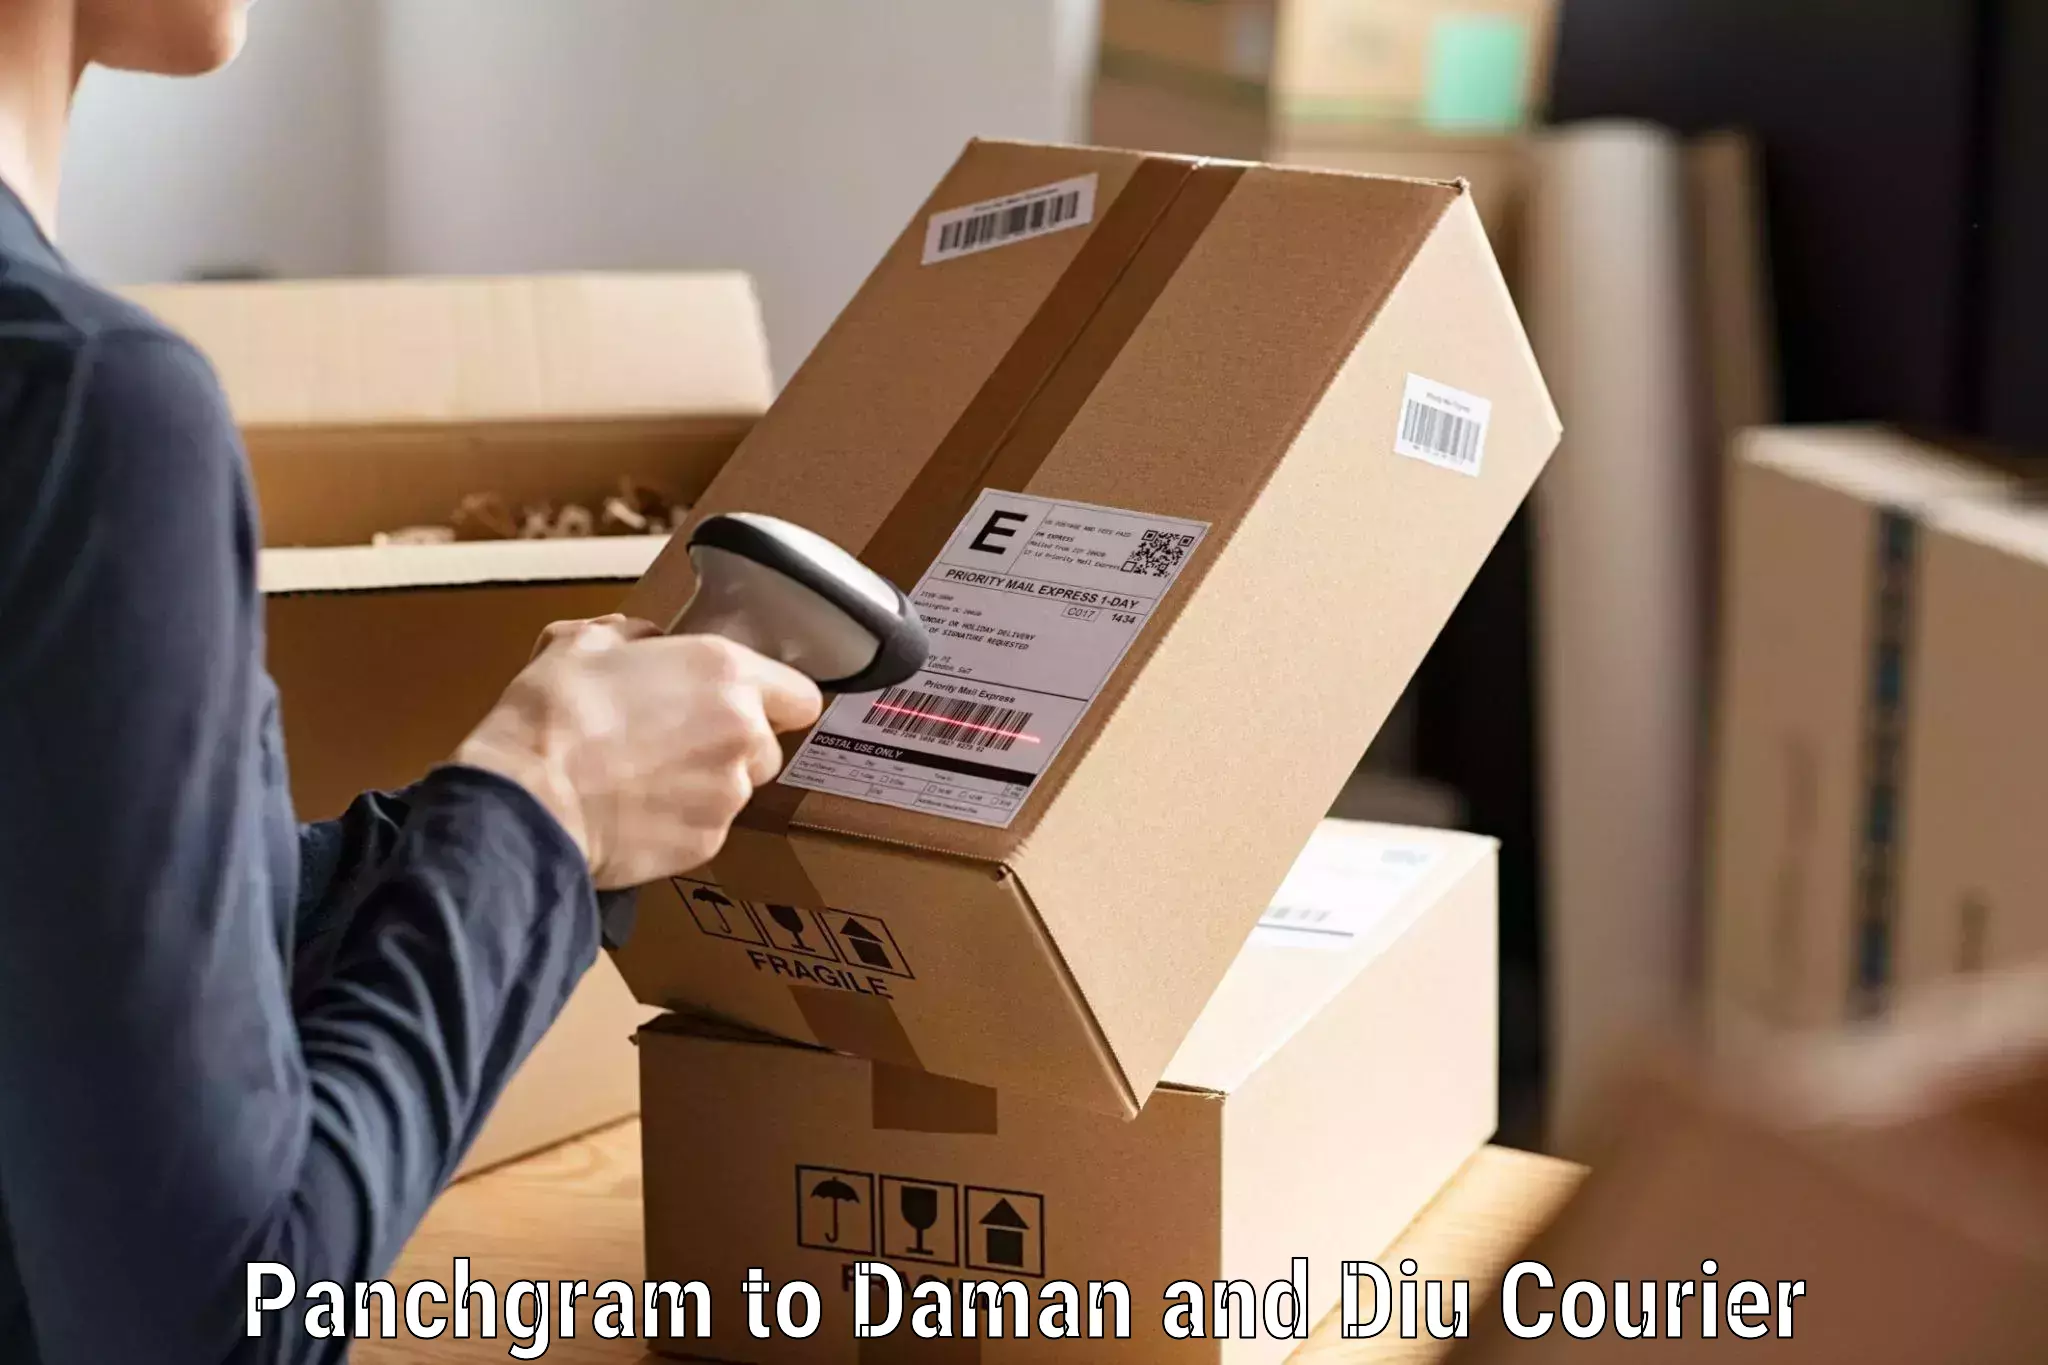 International courier networks Panchgram to Daman and Diu